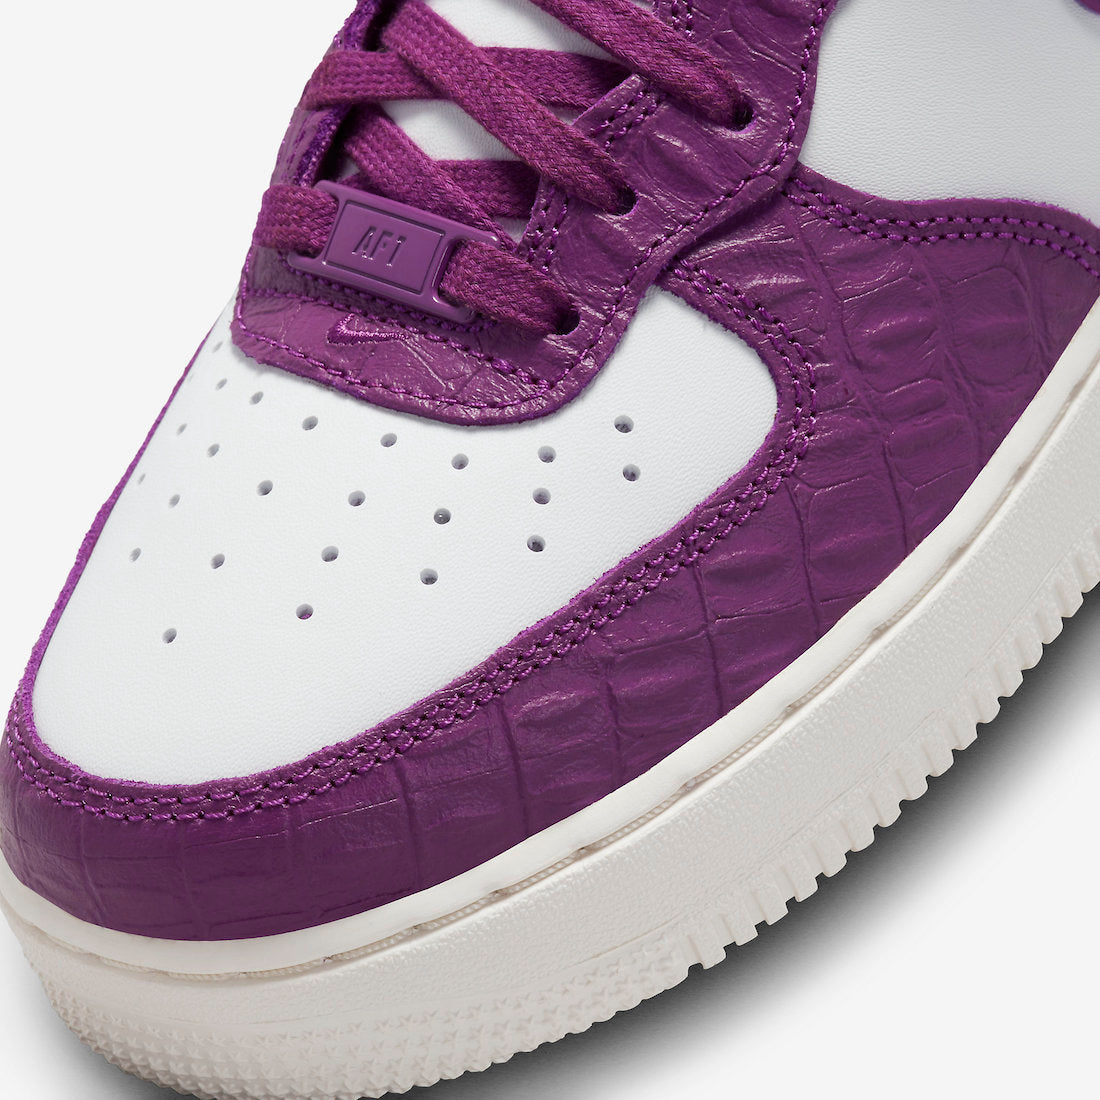 Nike Air Force 1 Mid WMNS “Tokyo 03”